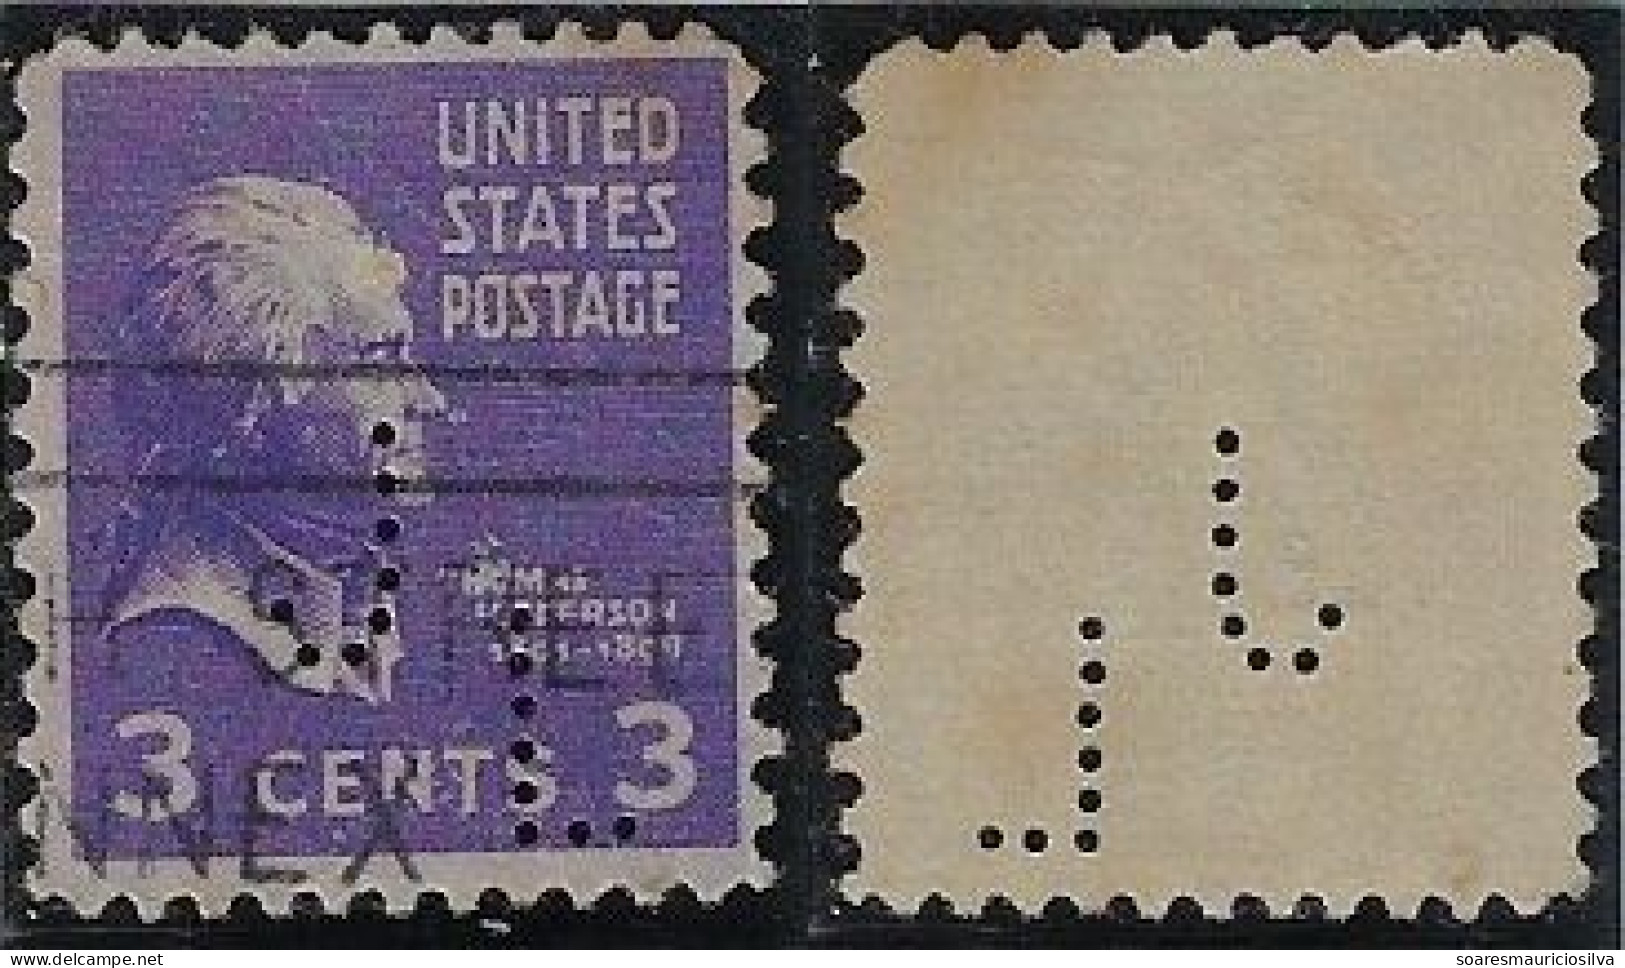 USA United States 1923/1938 Stamp With Perfin JL By John Lucas & Company Incorported From New York Lochung Perfore - Perforados